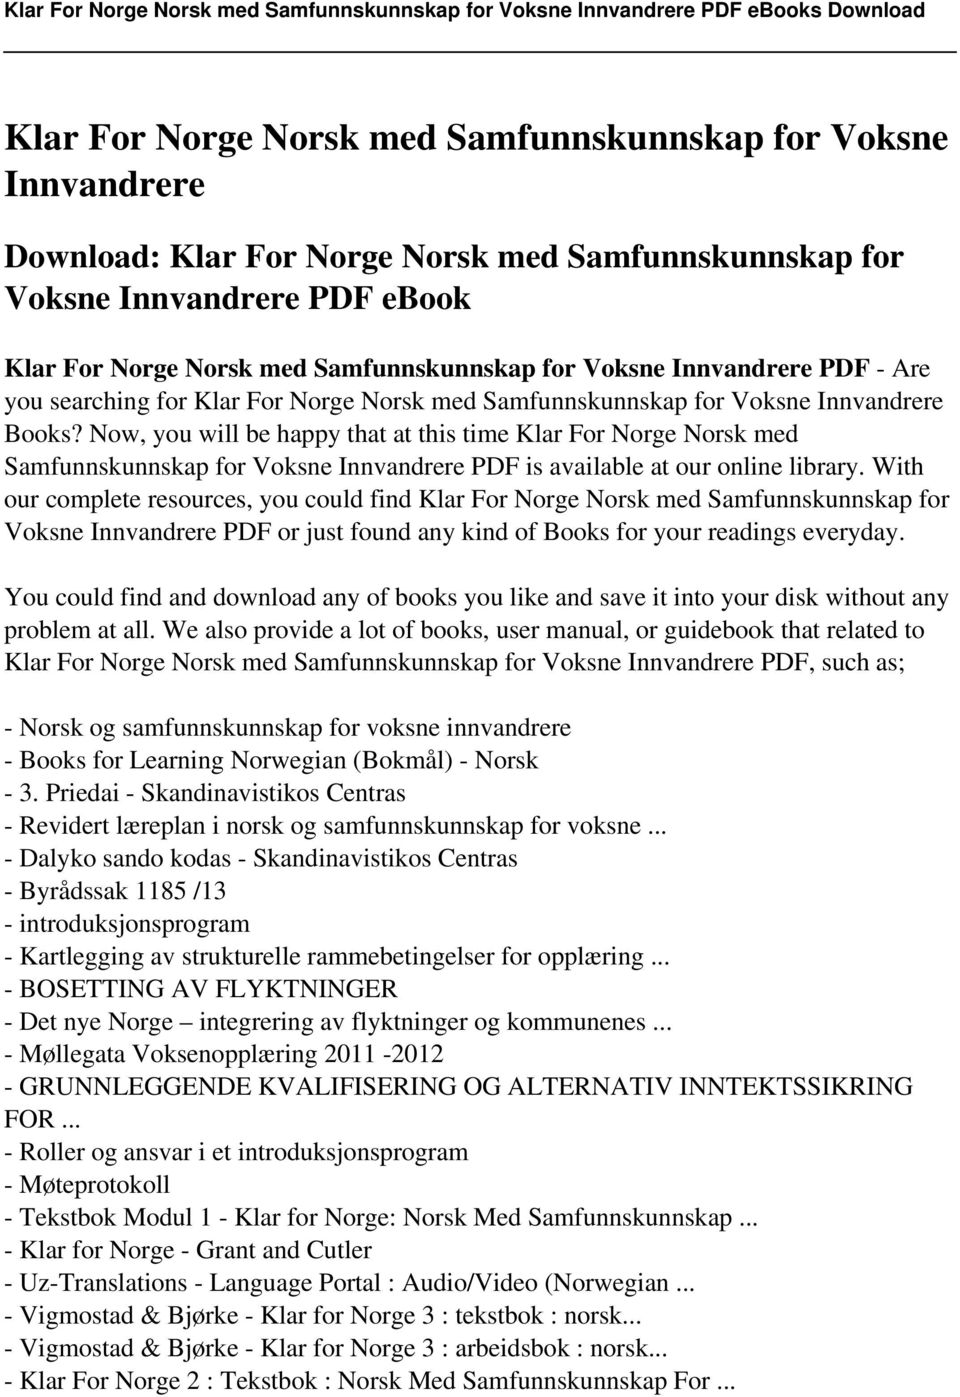 Now, you will be happy that at this time Klar For Norge Norsk med Samfunnskunnskap for Voksne Innvandrere PDF is available at our online library.